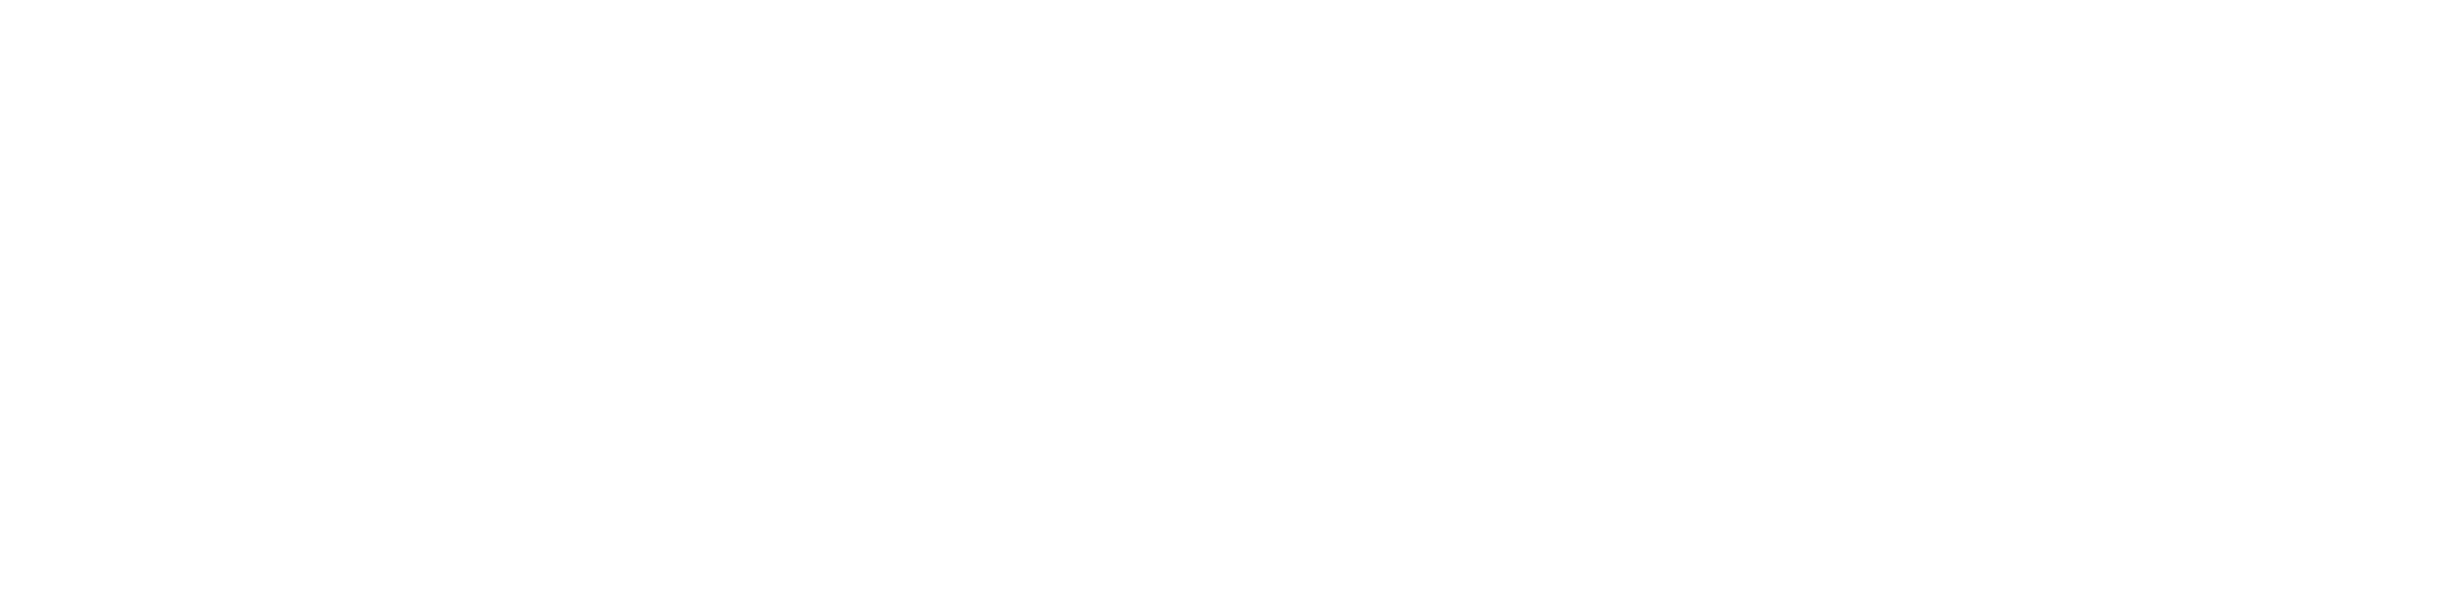 LocaGestion - Client - GMAO Agence Immobilière